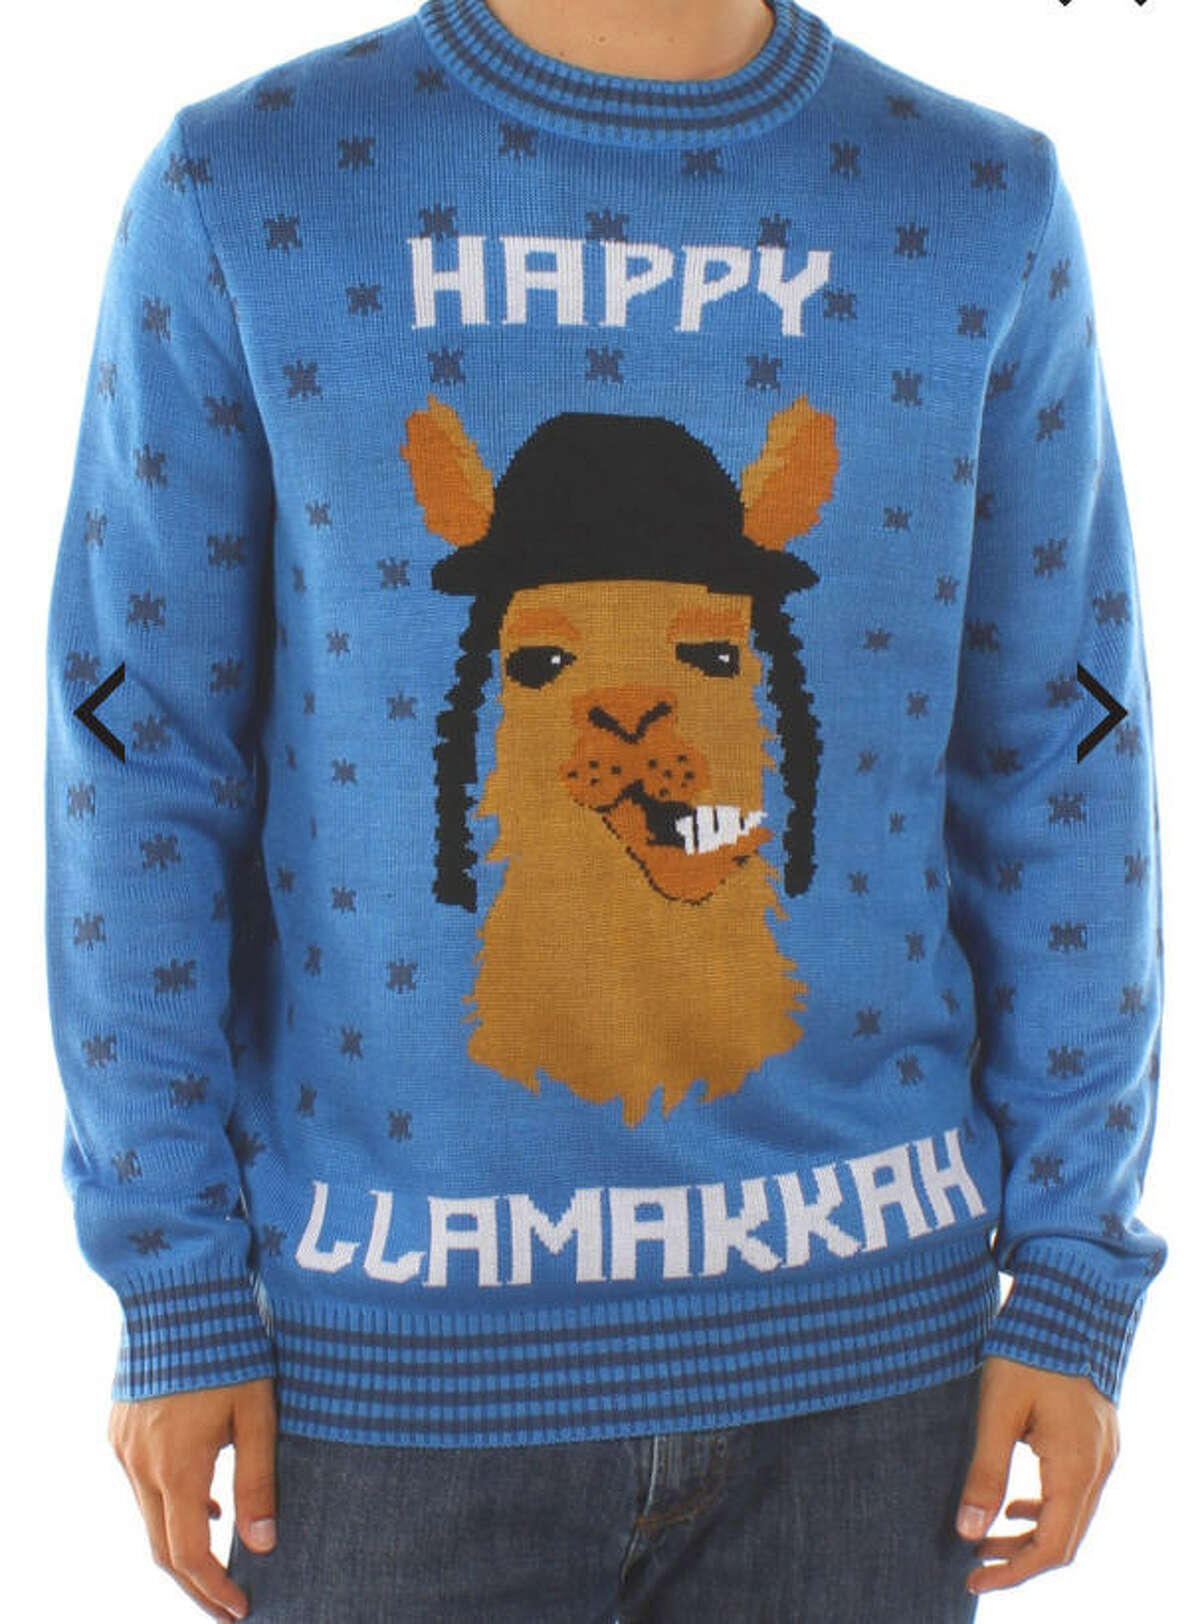 You can get this Hanukkah sweater here.